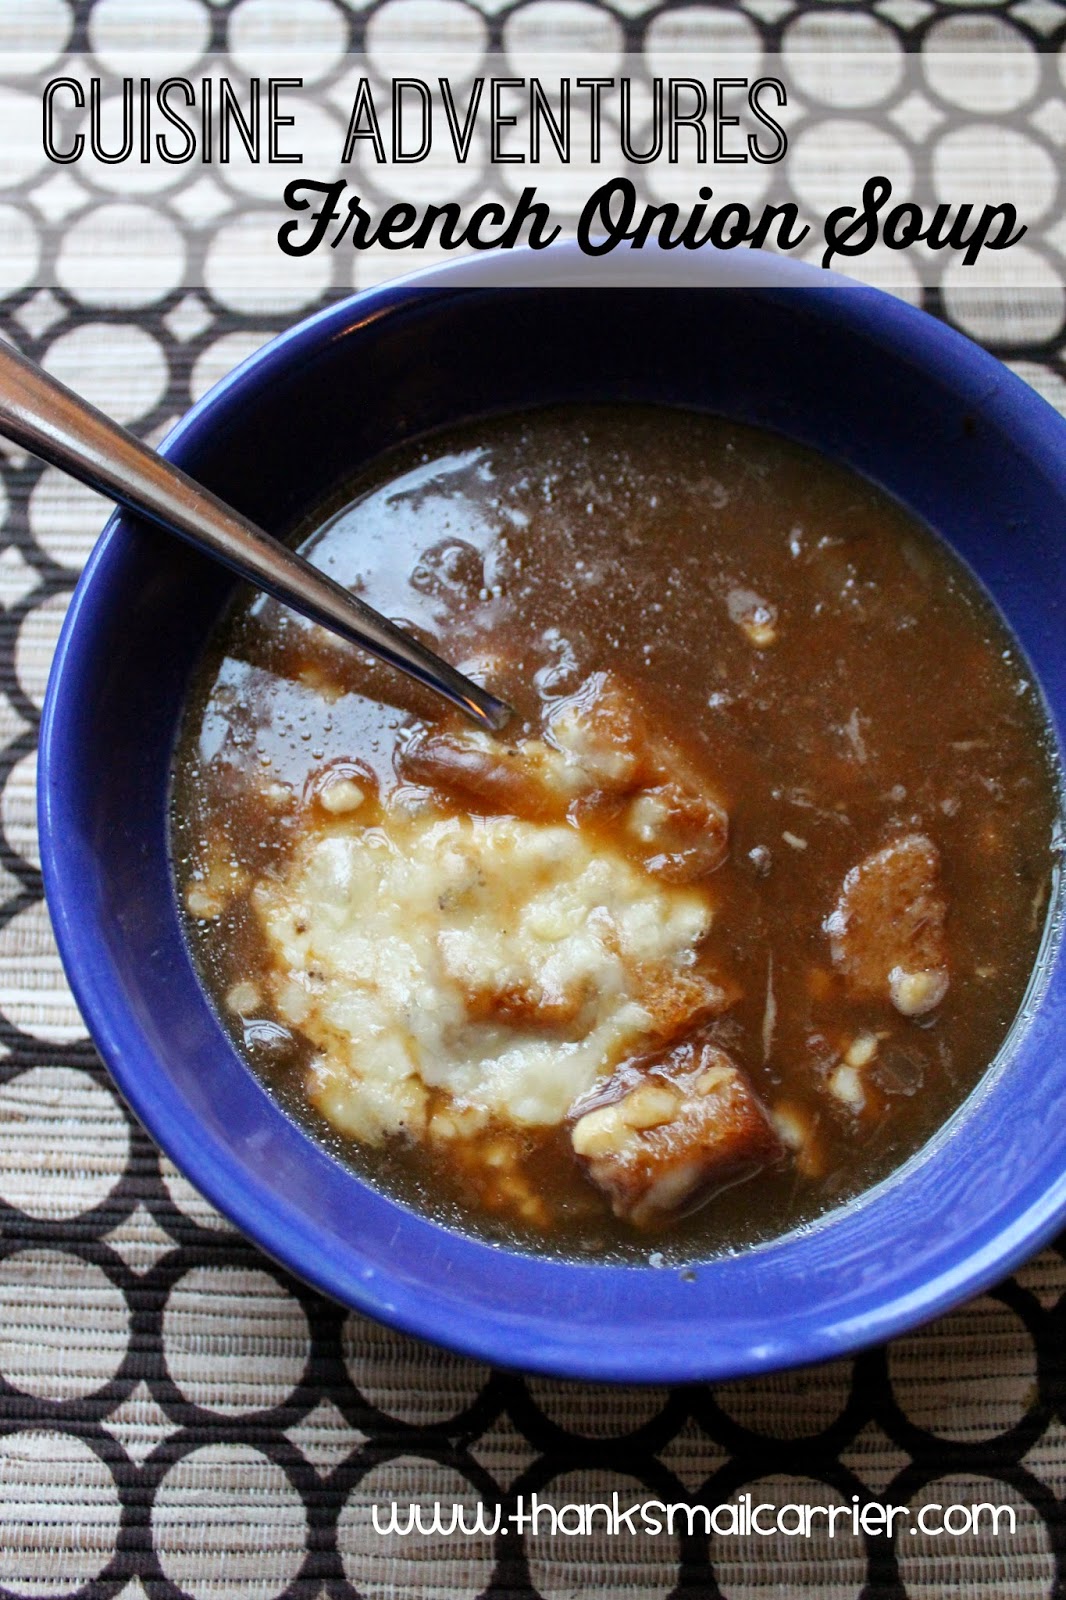 Cuisine Adventures french onion soup review